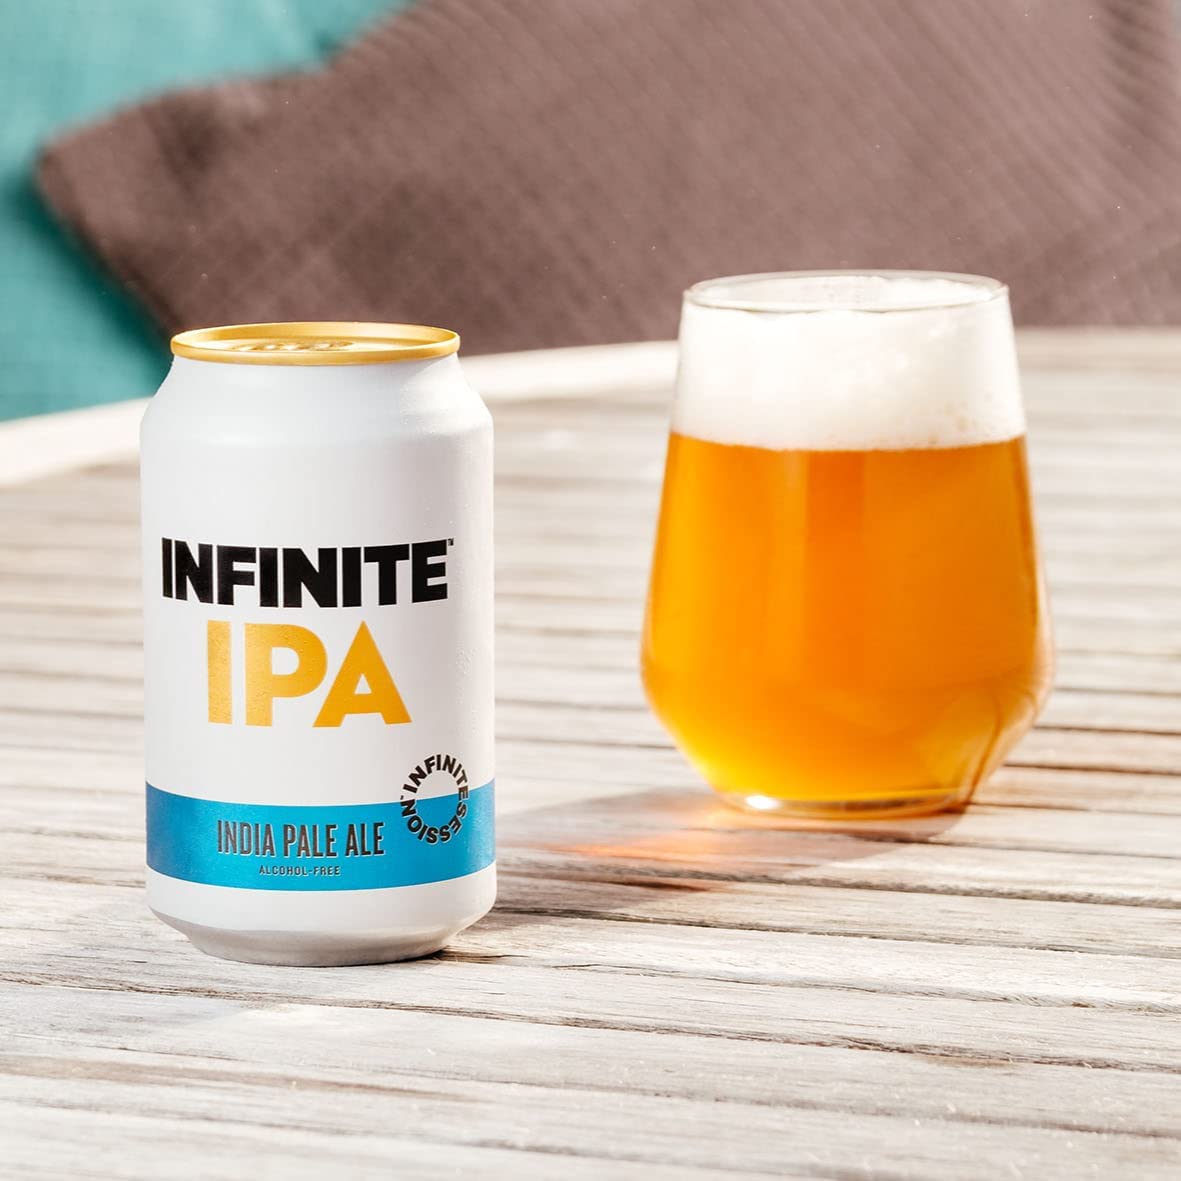 Infinite IPA alcohlol free can and glass filled with it